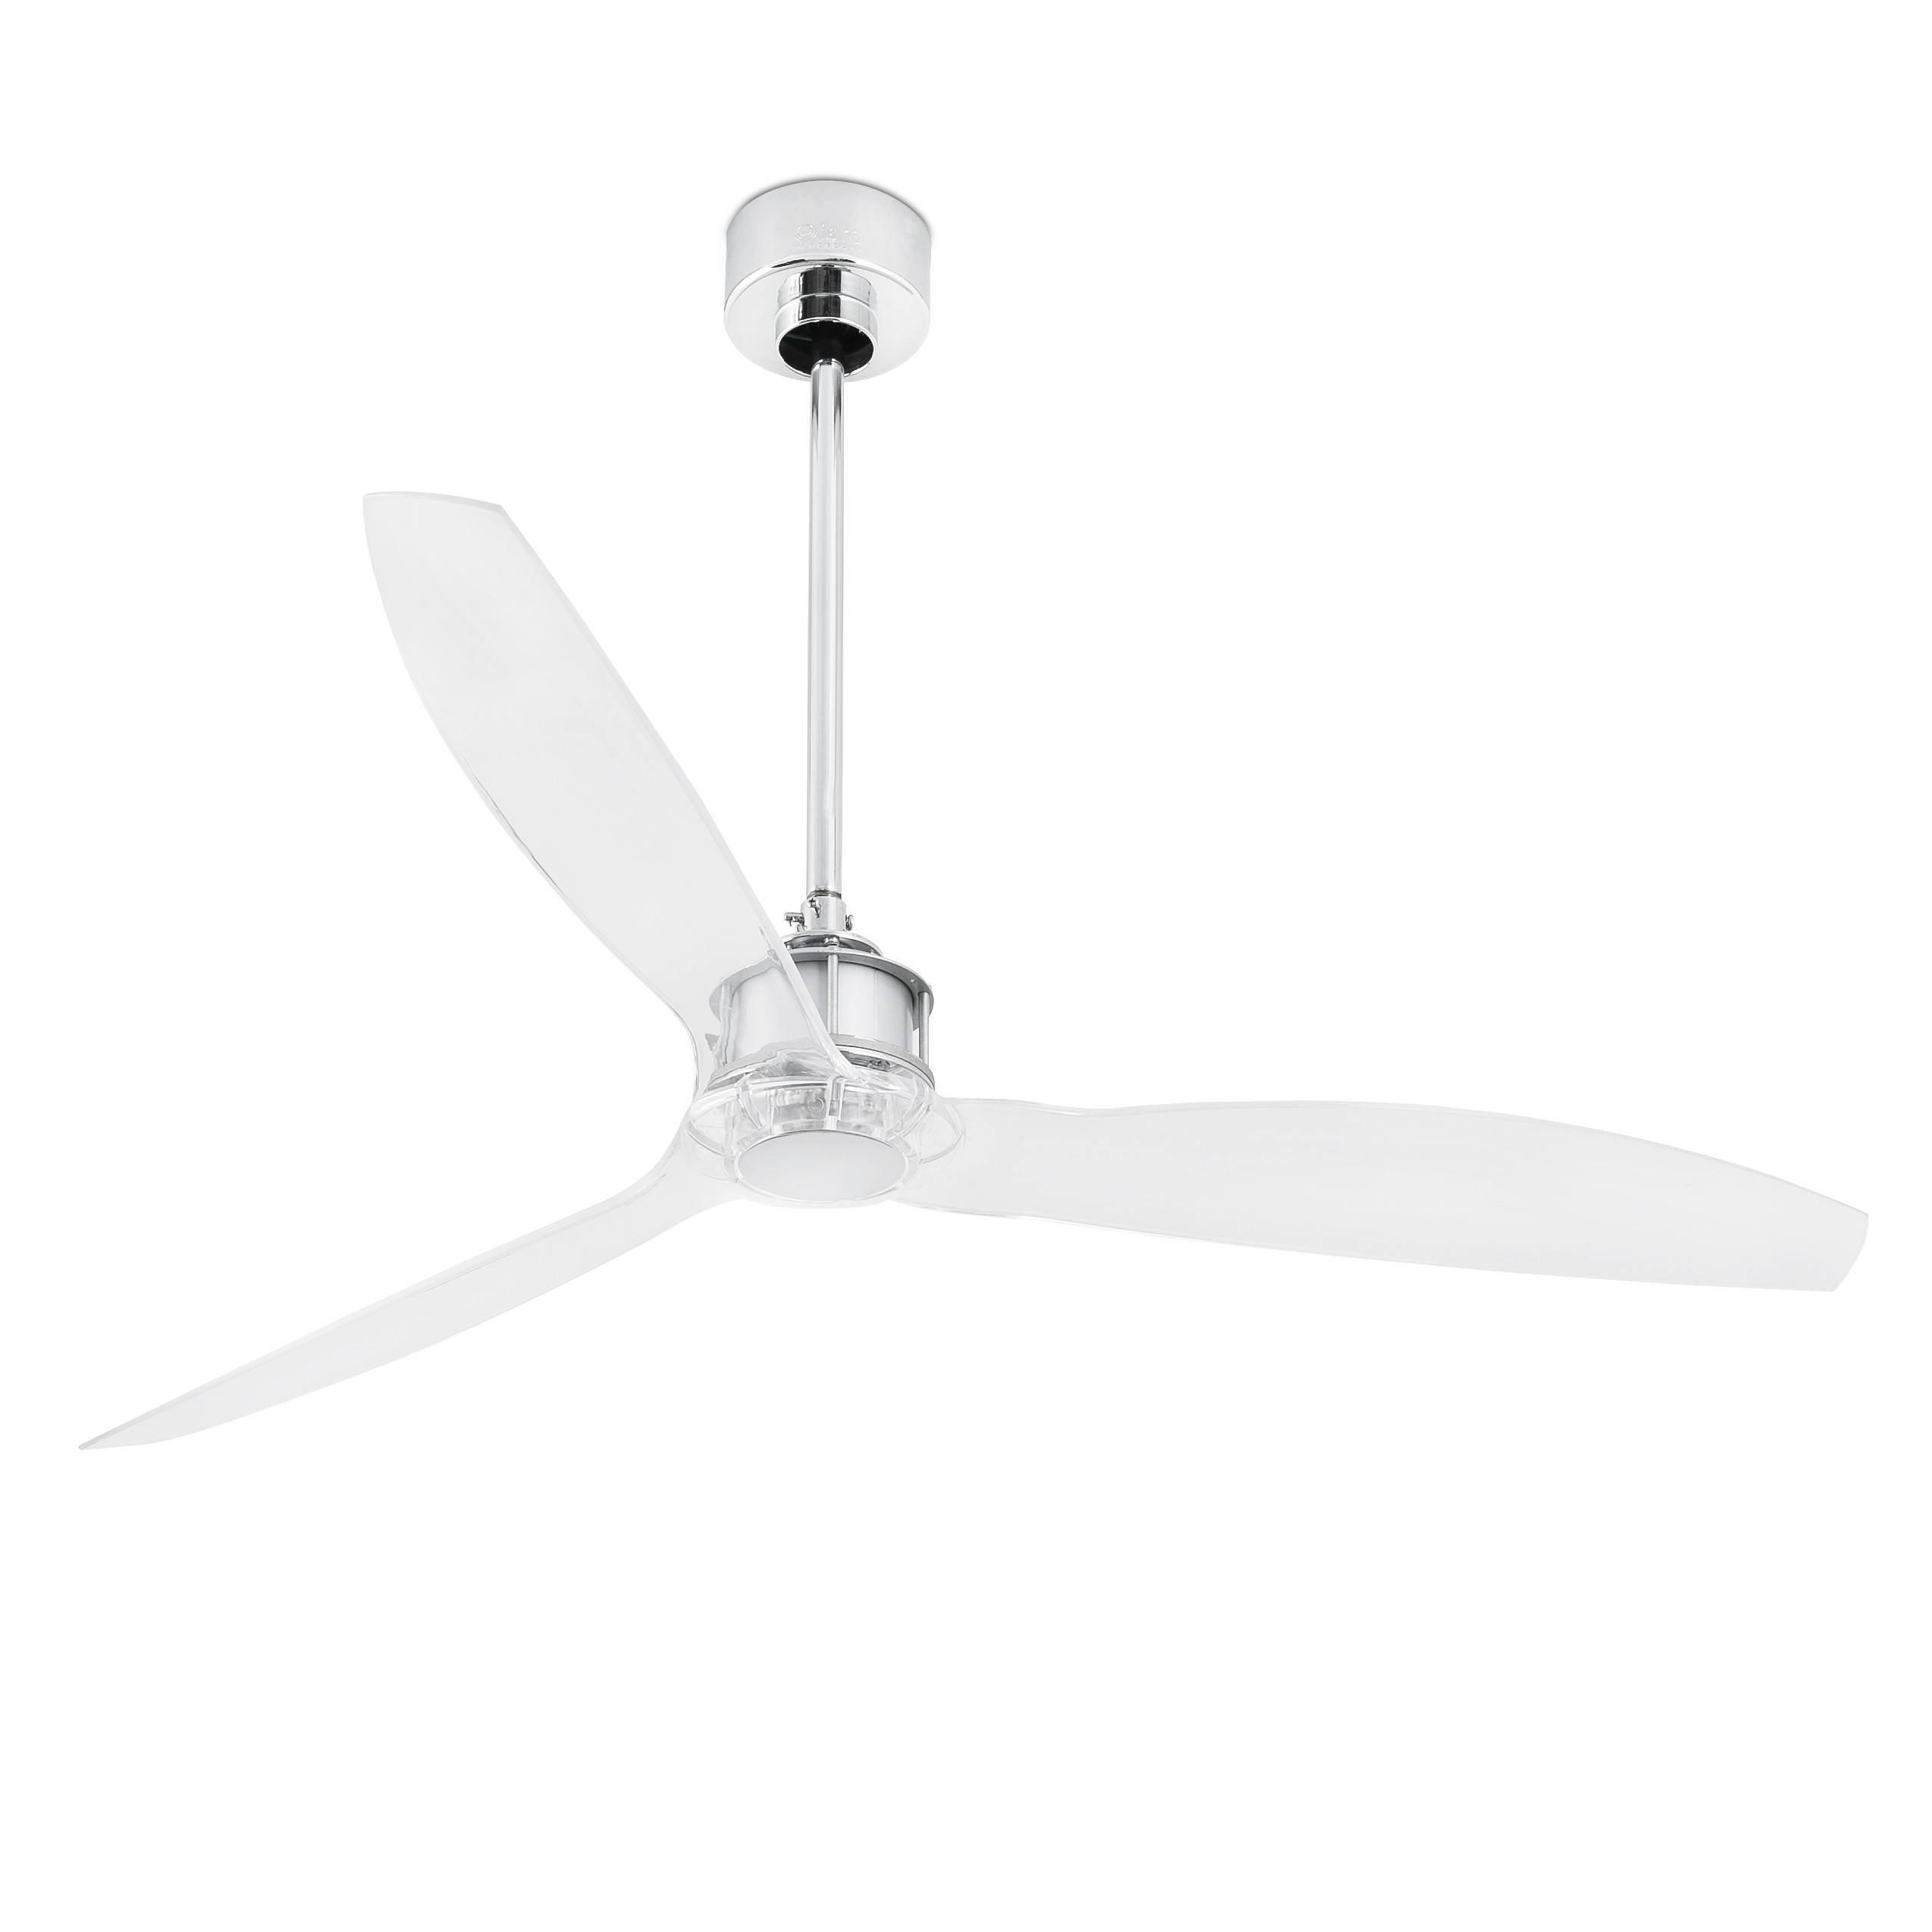 Just Fan Ceiling Fan in Chrome with Remote gray